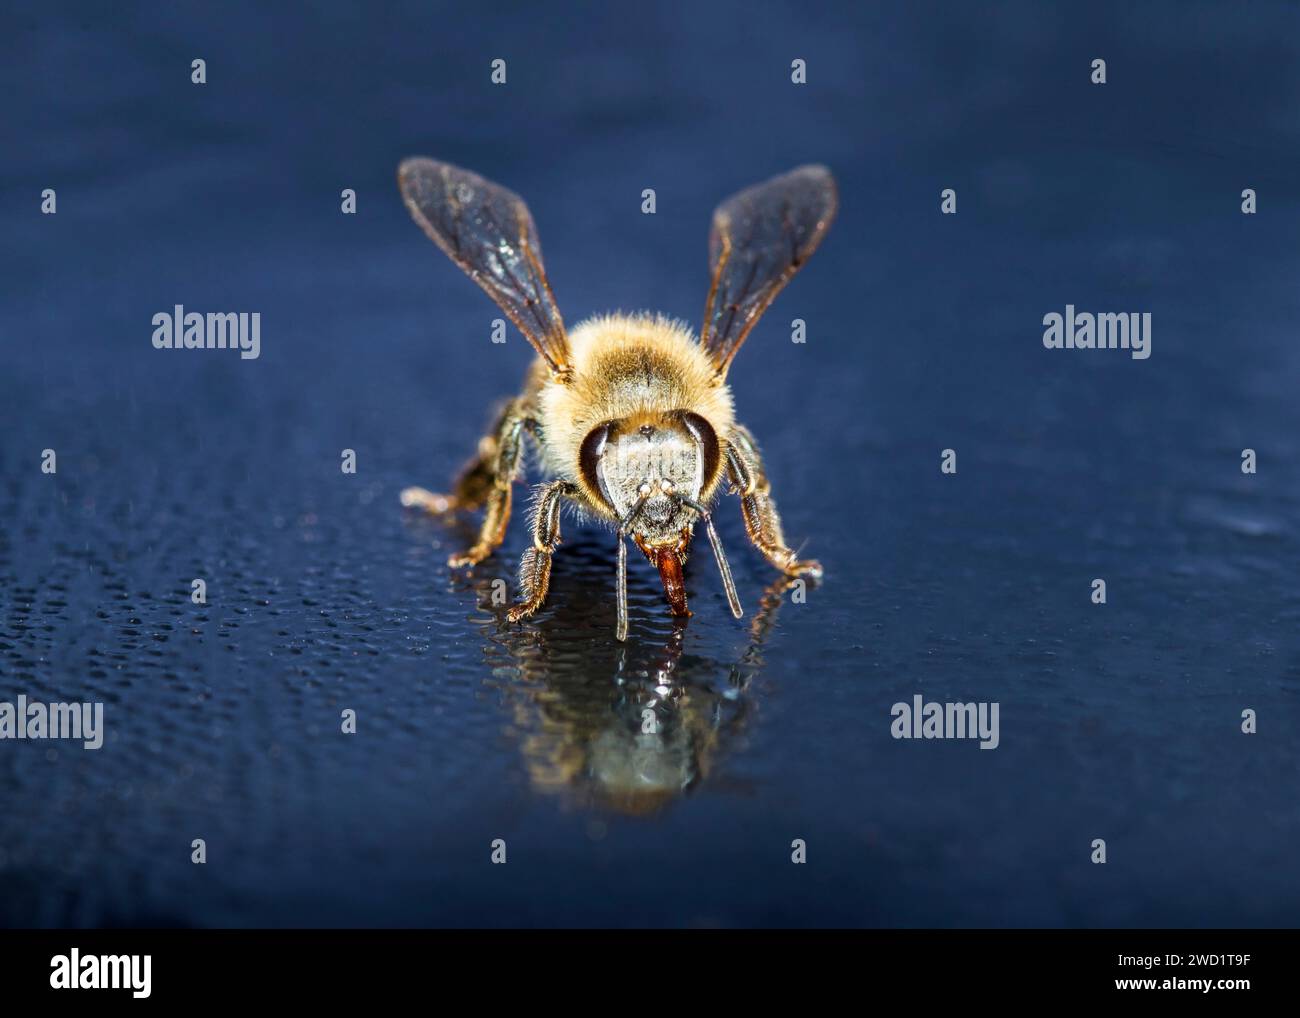 African Honeybee Close-Up Macro Photography South Africa Stock Photo